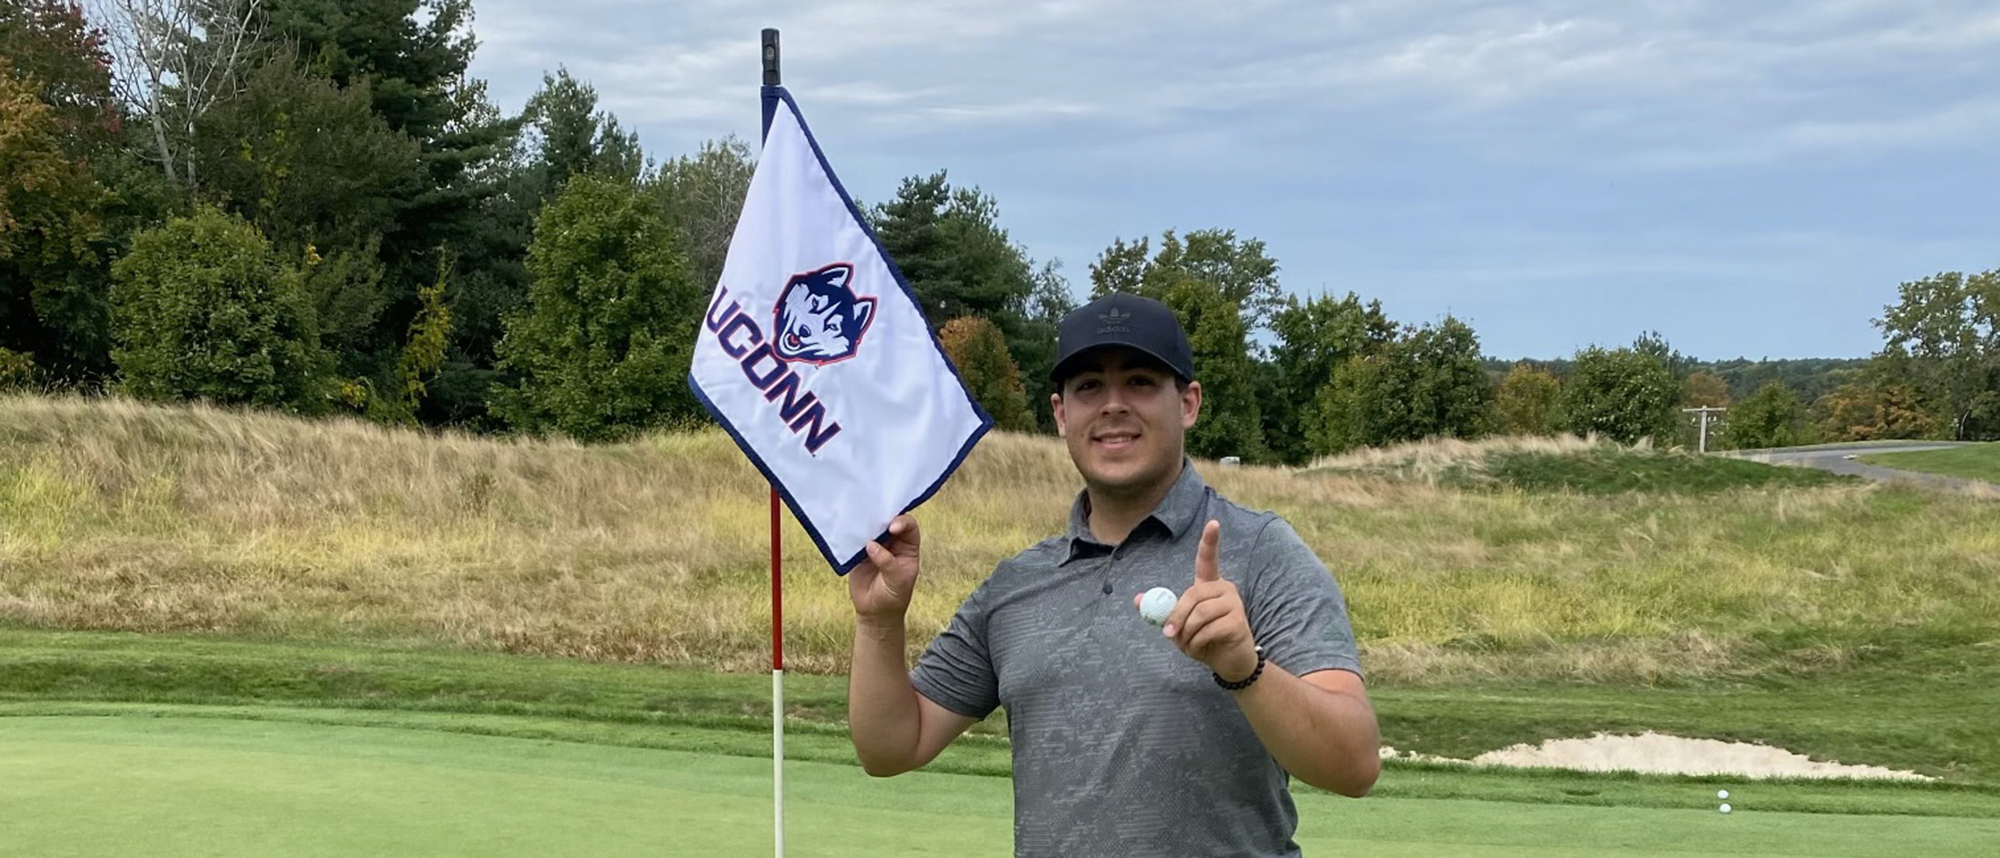 Hahn records Hole-In-One at UConn Invitational